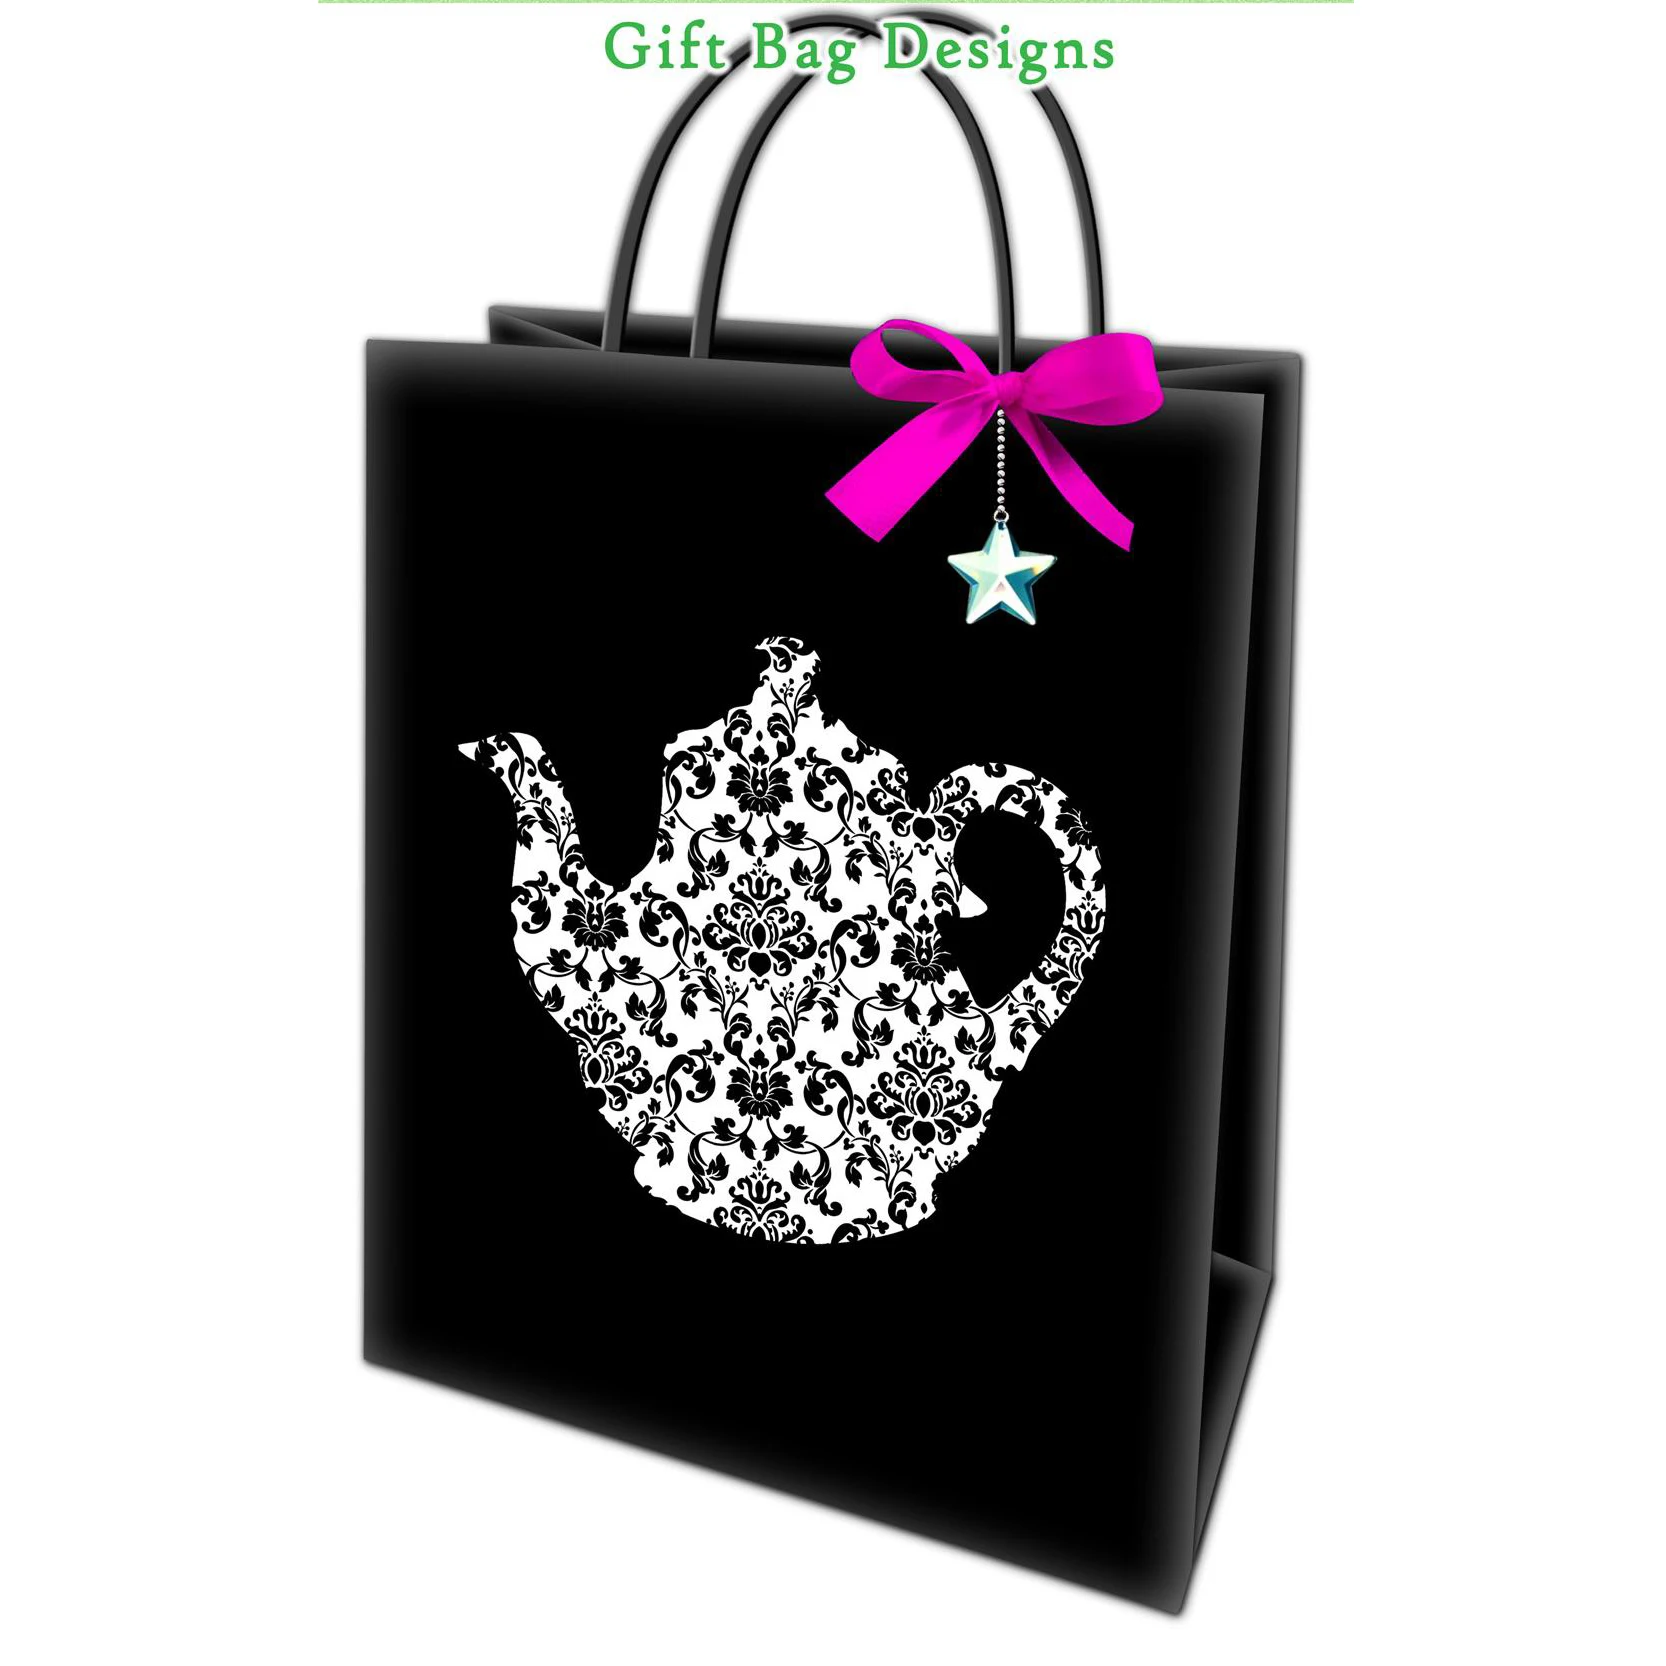 Jialan Package gift bags wholesale company for packing gifts